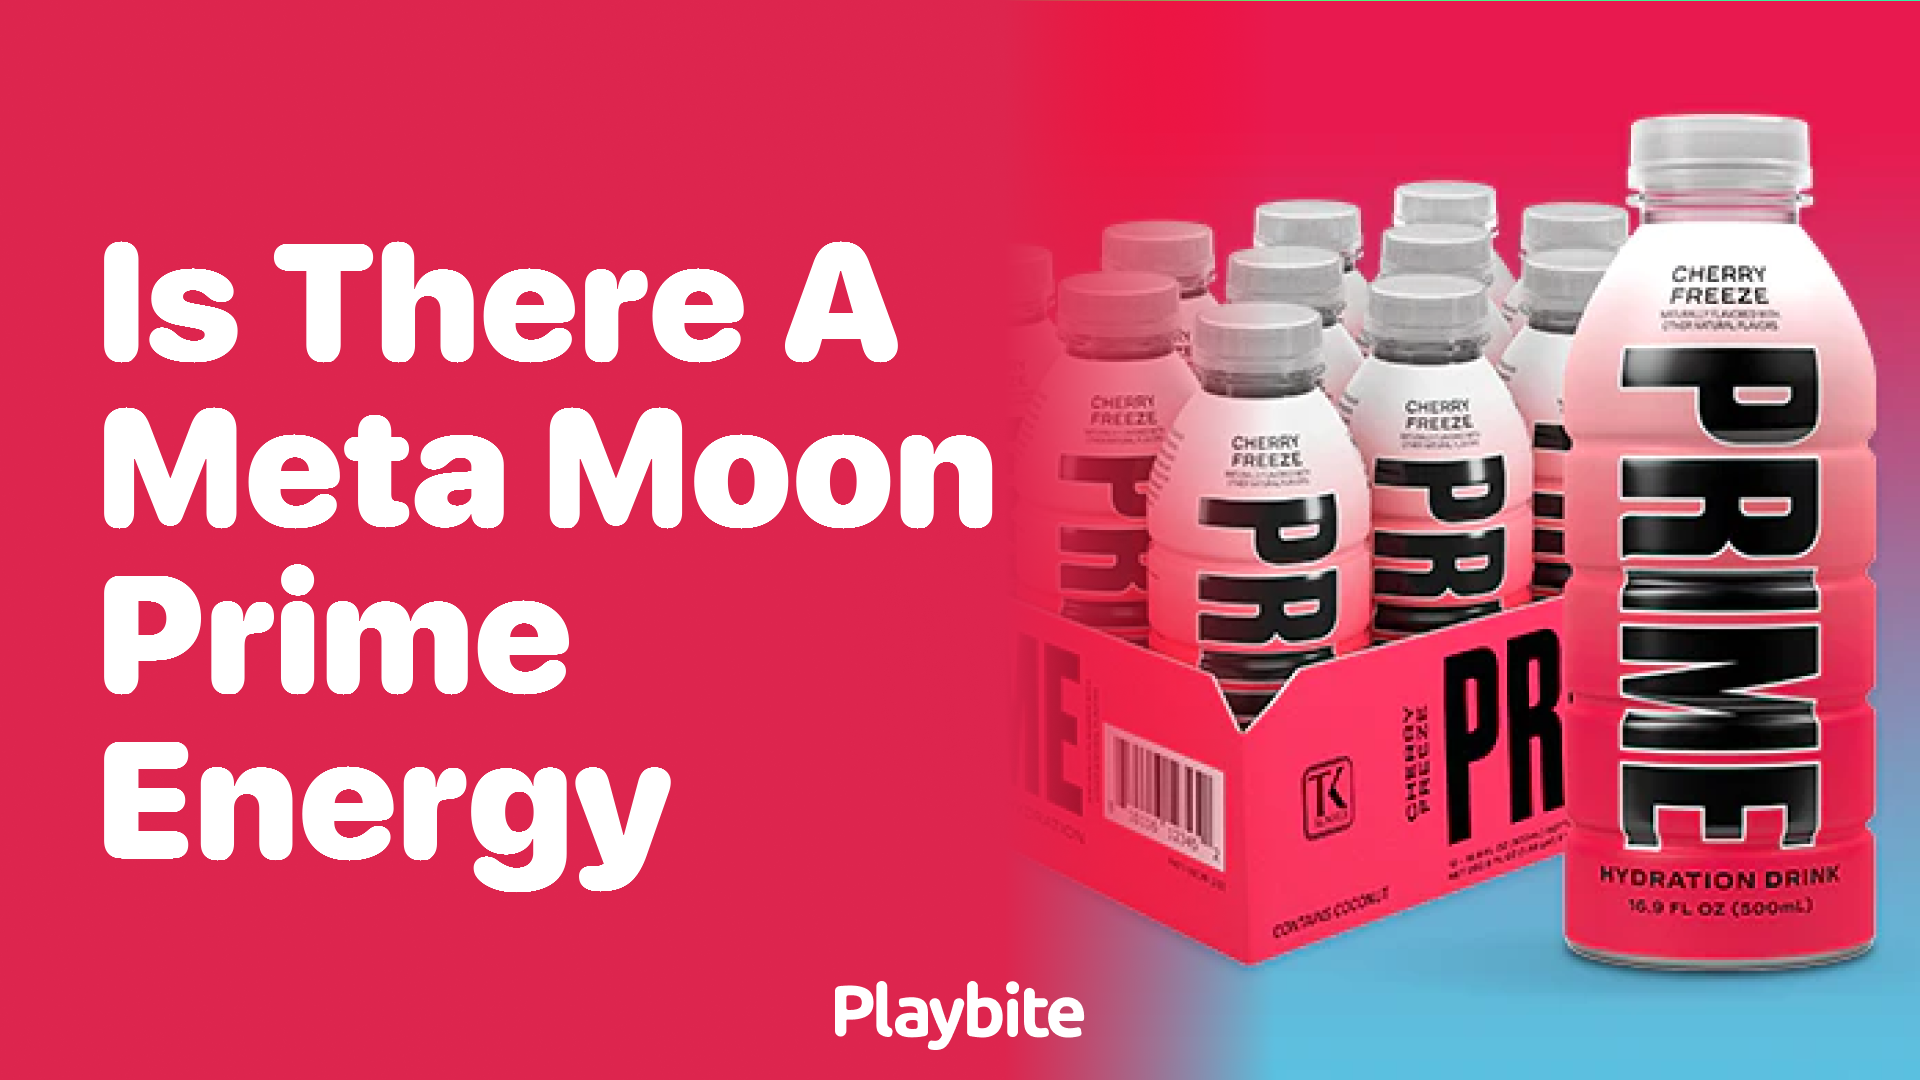 Is there a Meta Moon Prime Energy Drink?